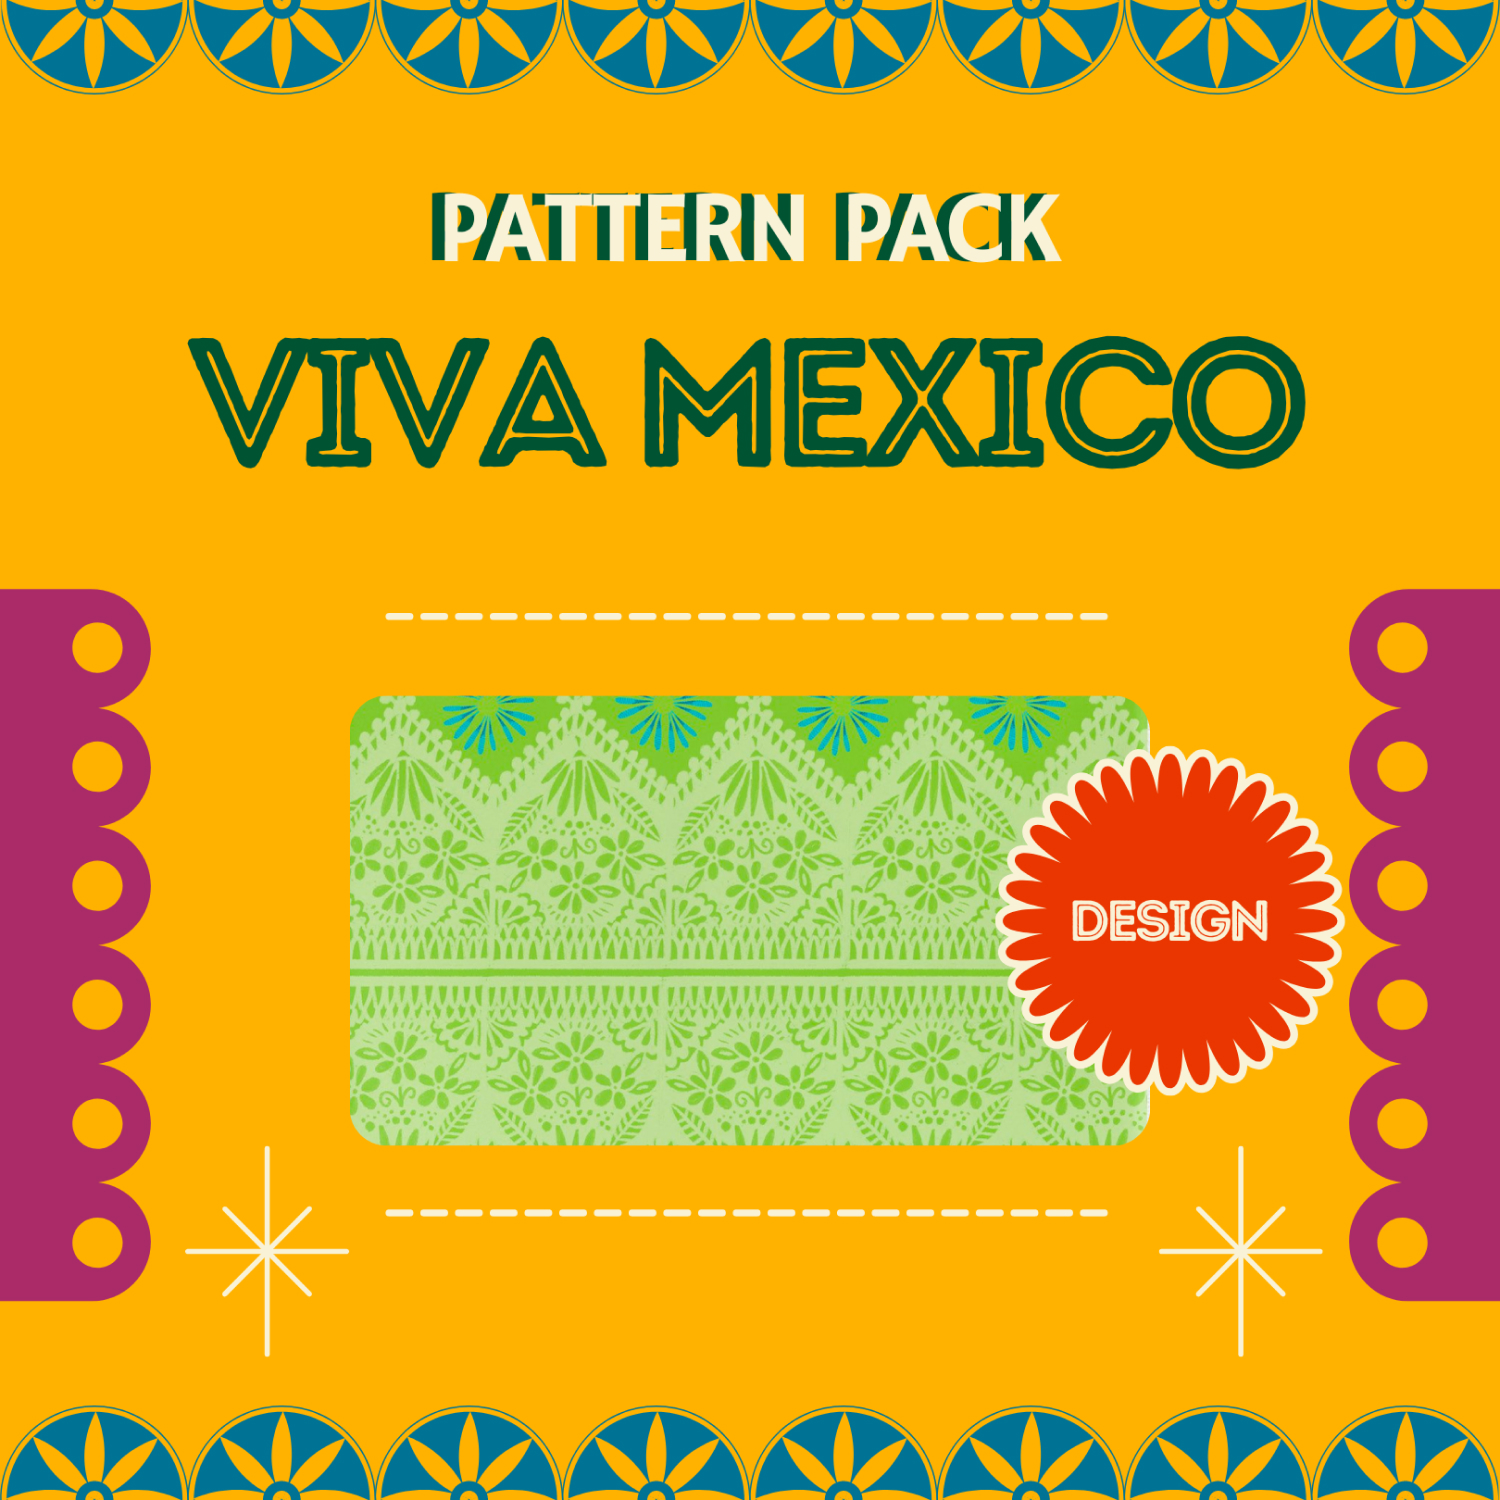 Preview viva mexico pattern pack.